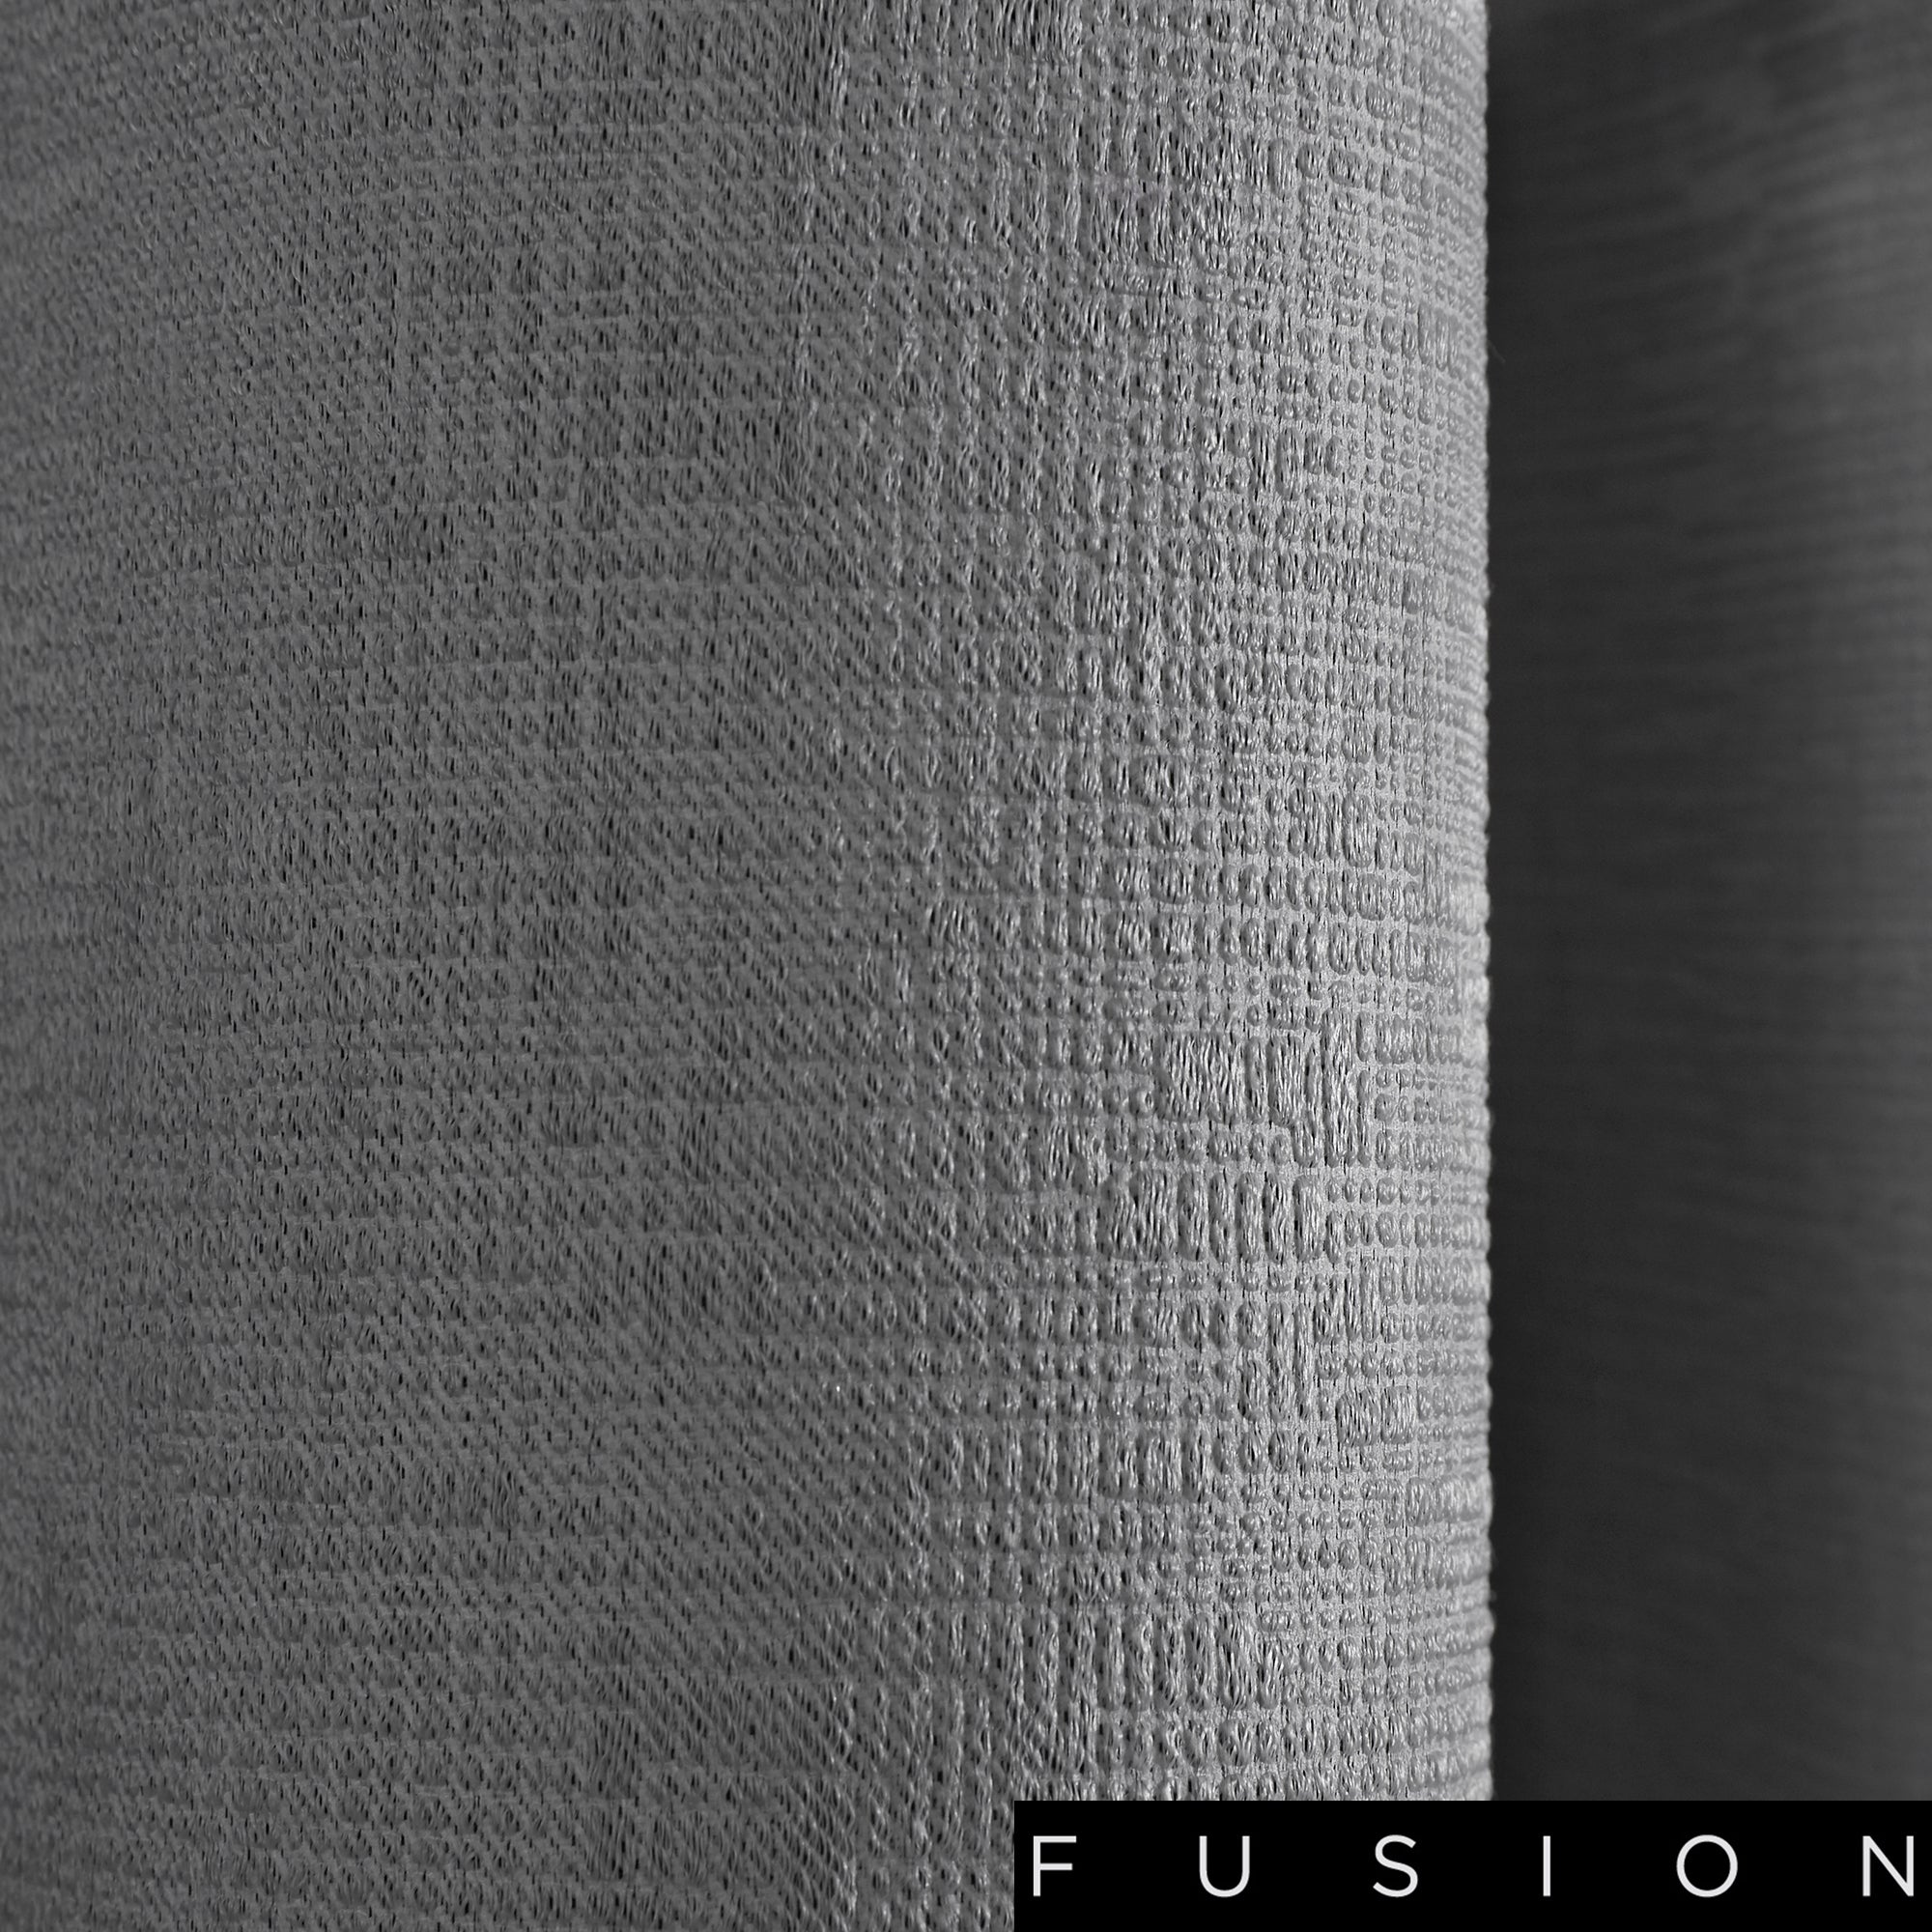 Strata - Blockout Eyelet Curtains in Silver - by Fusion